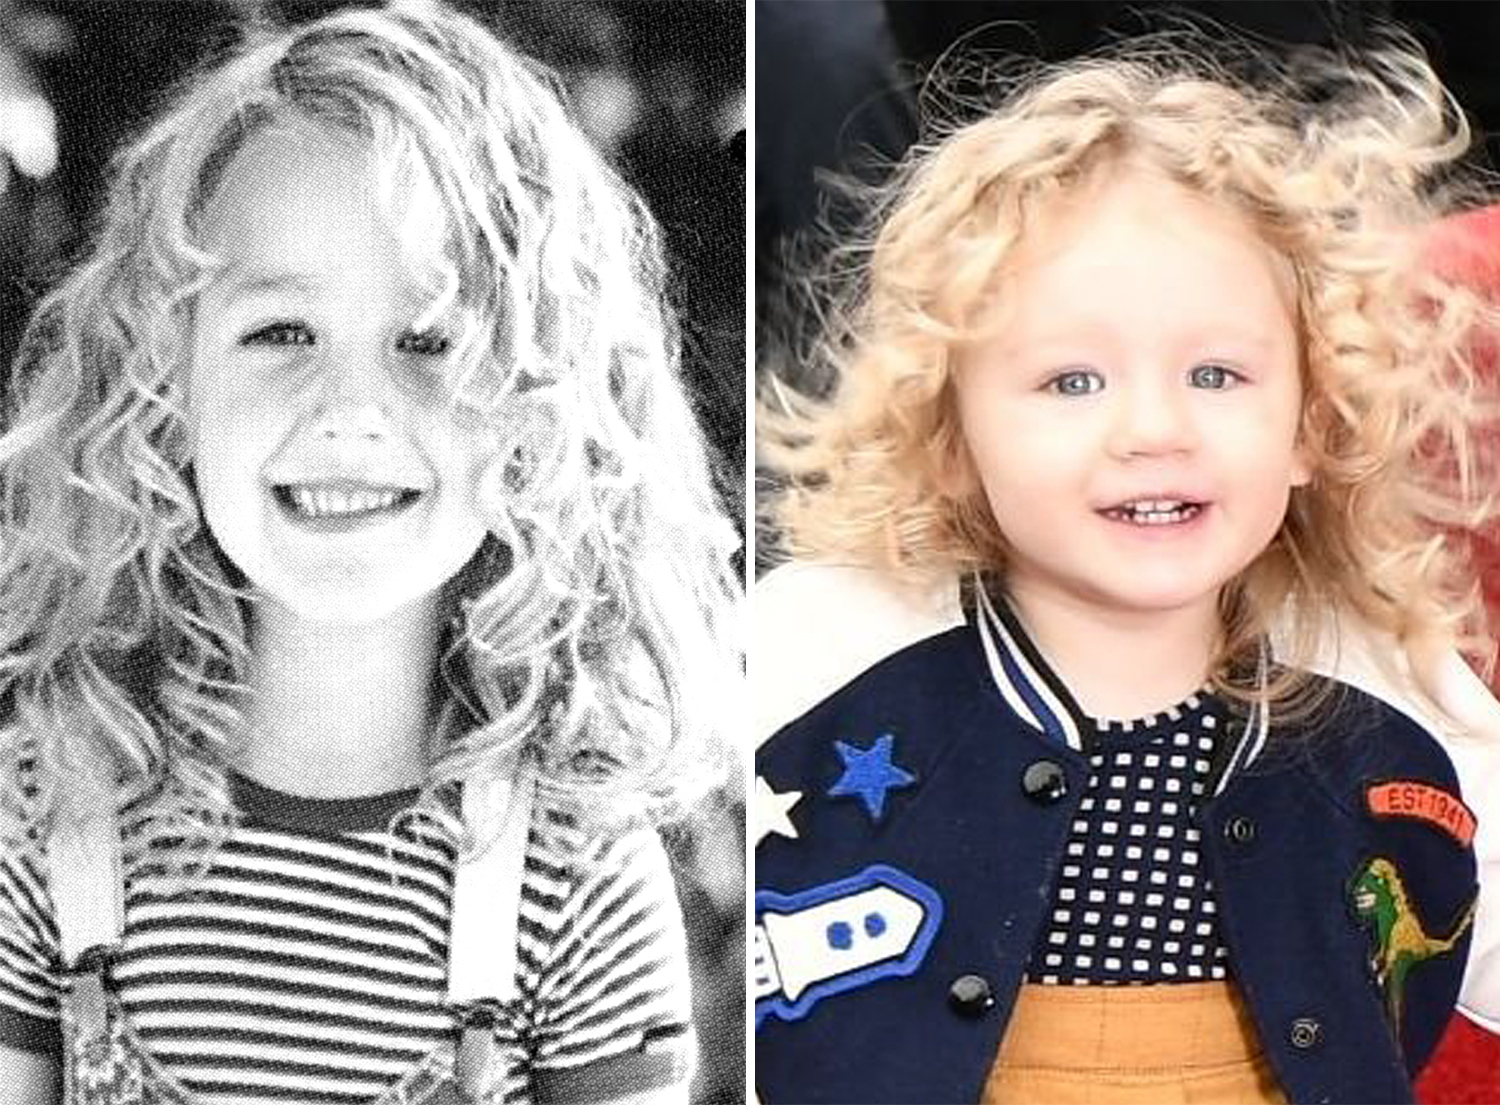 Blake Lively’s Daughter James Looks Just Like Her